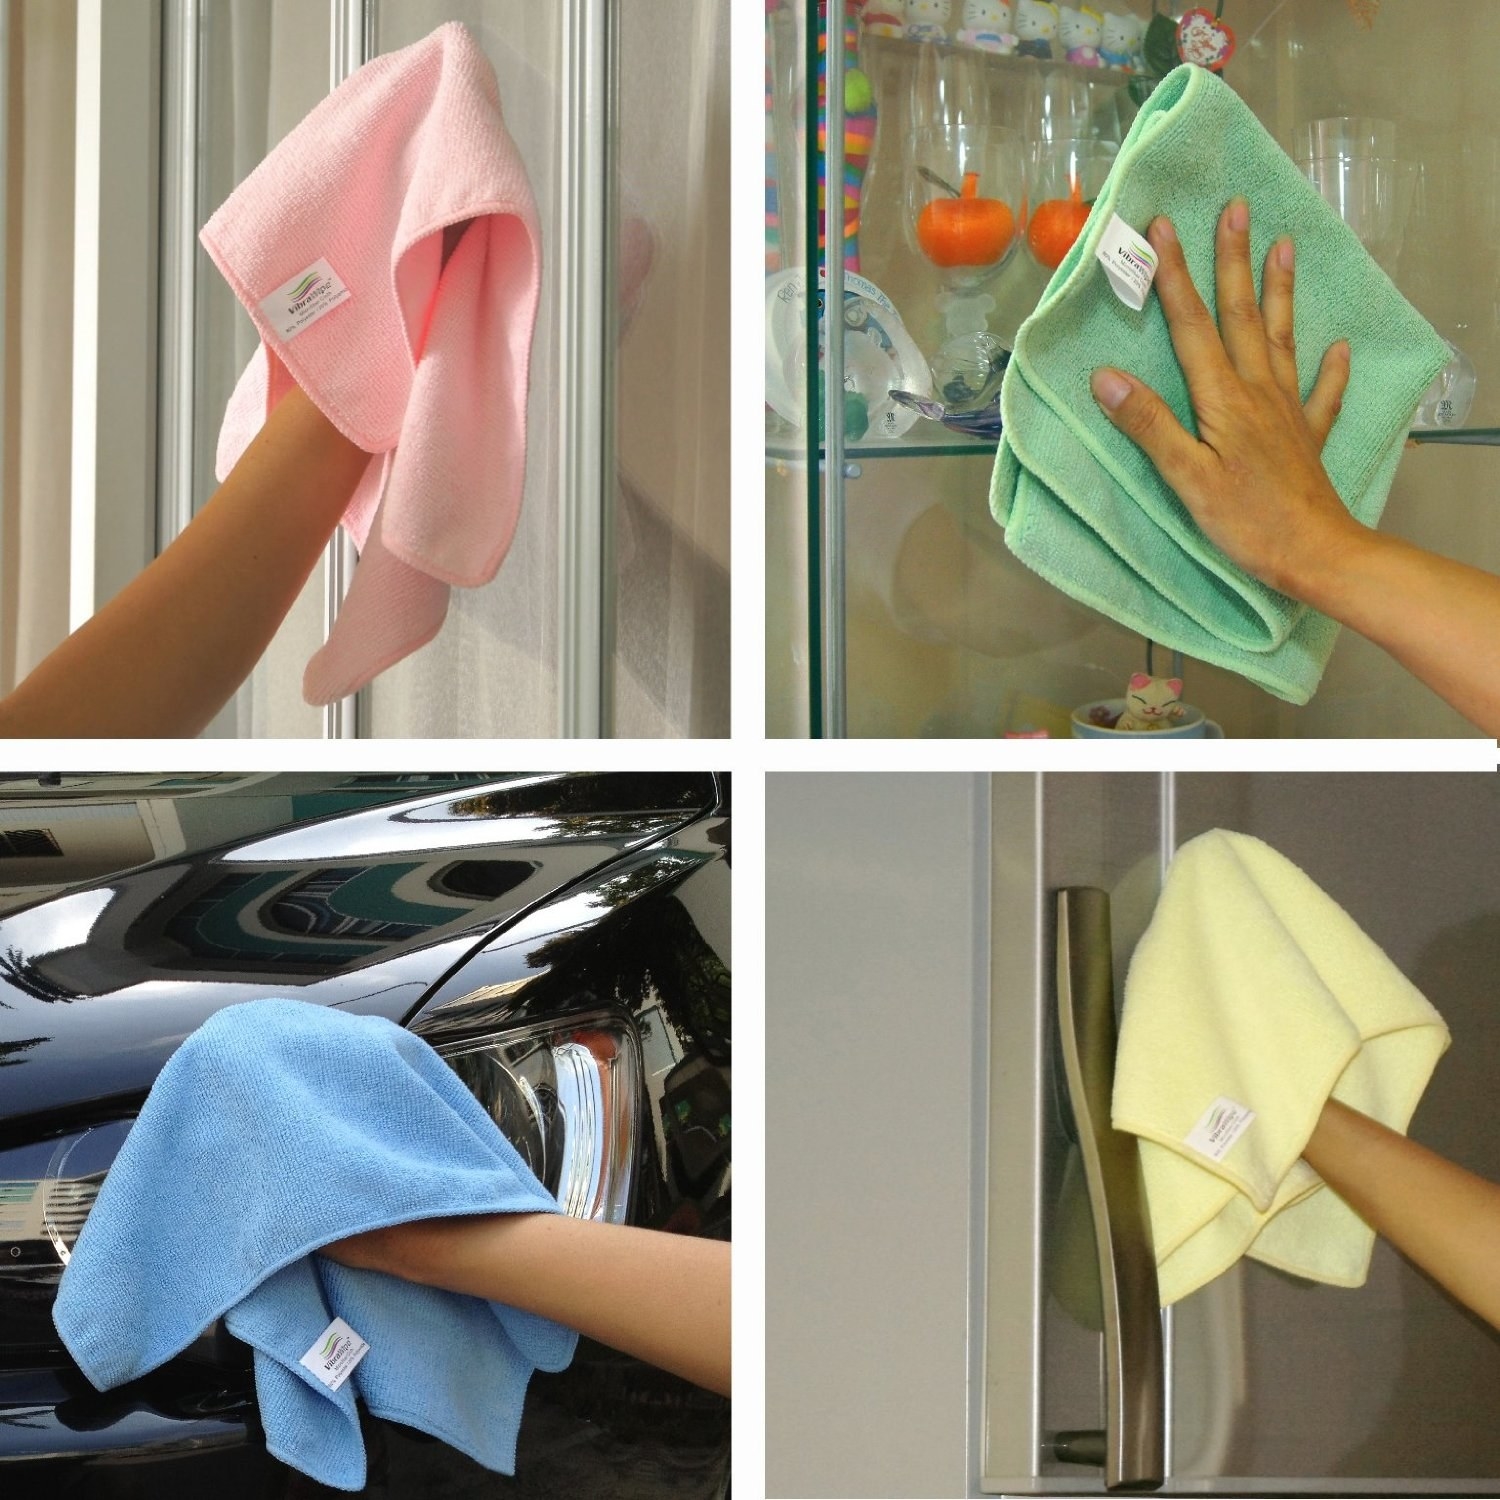 28 Things You Need If You've Basically Never Cleaned Your Home Correctly